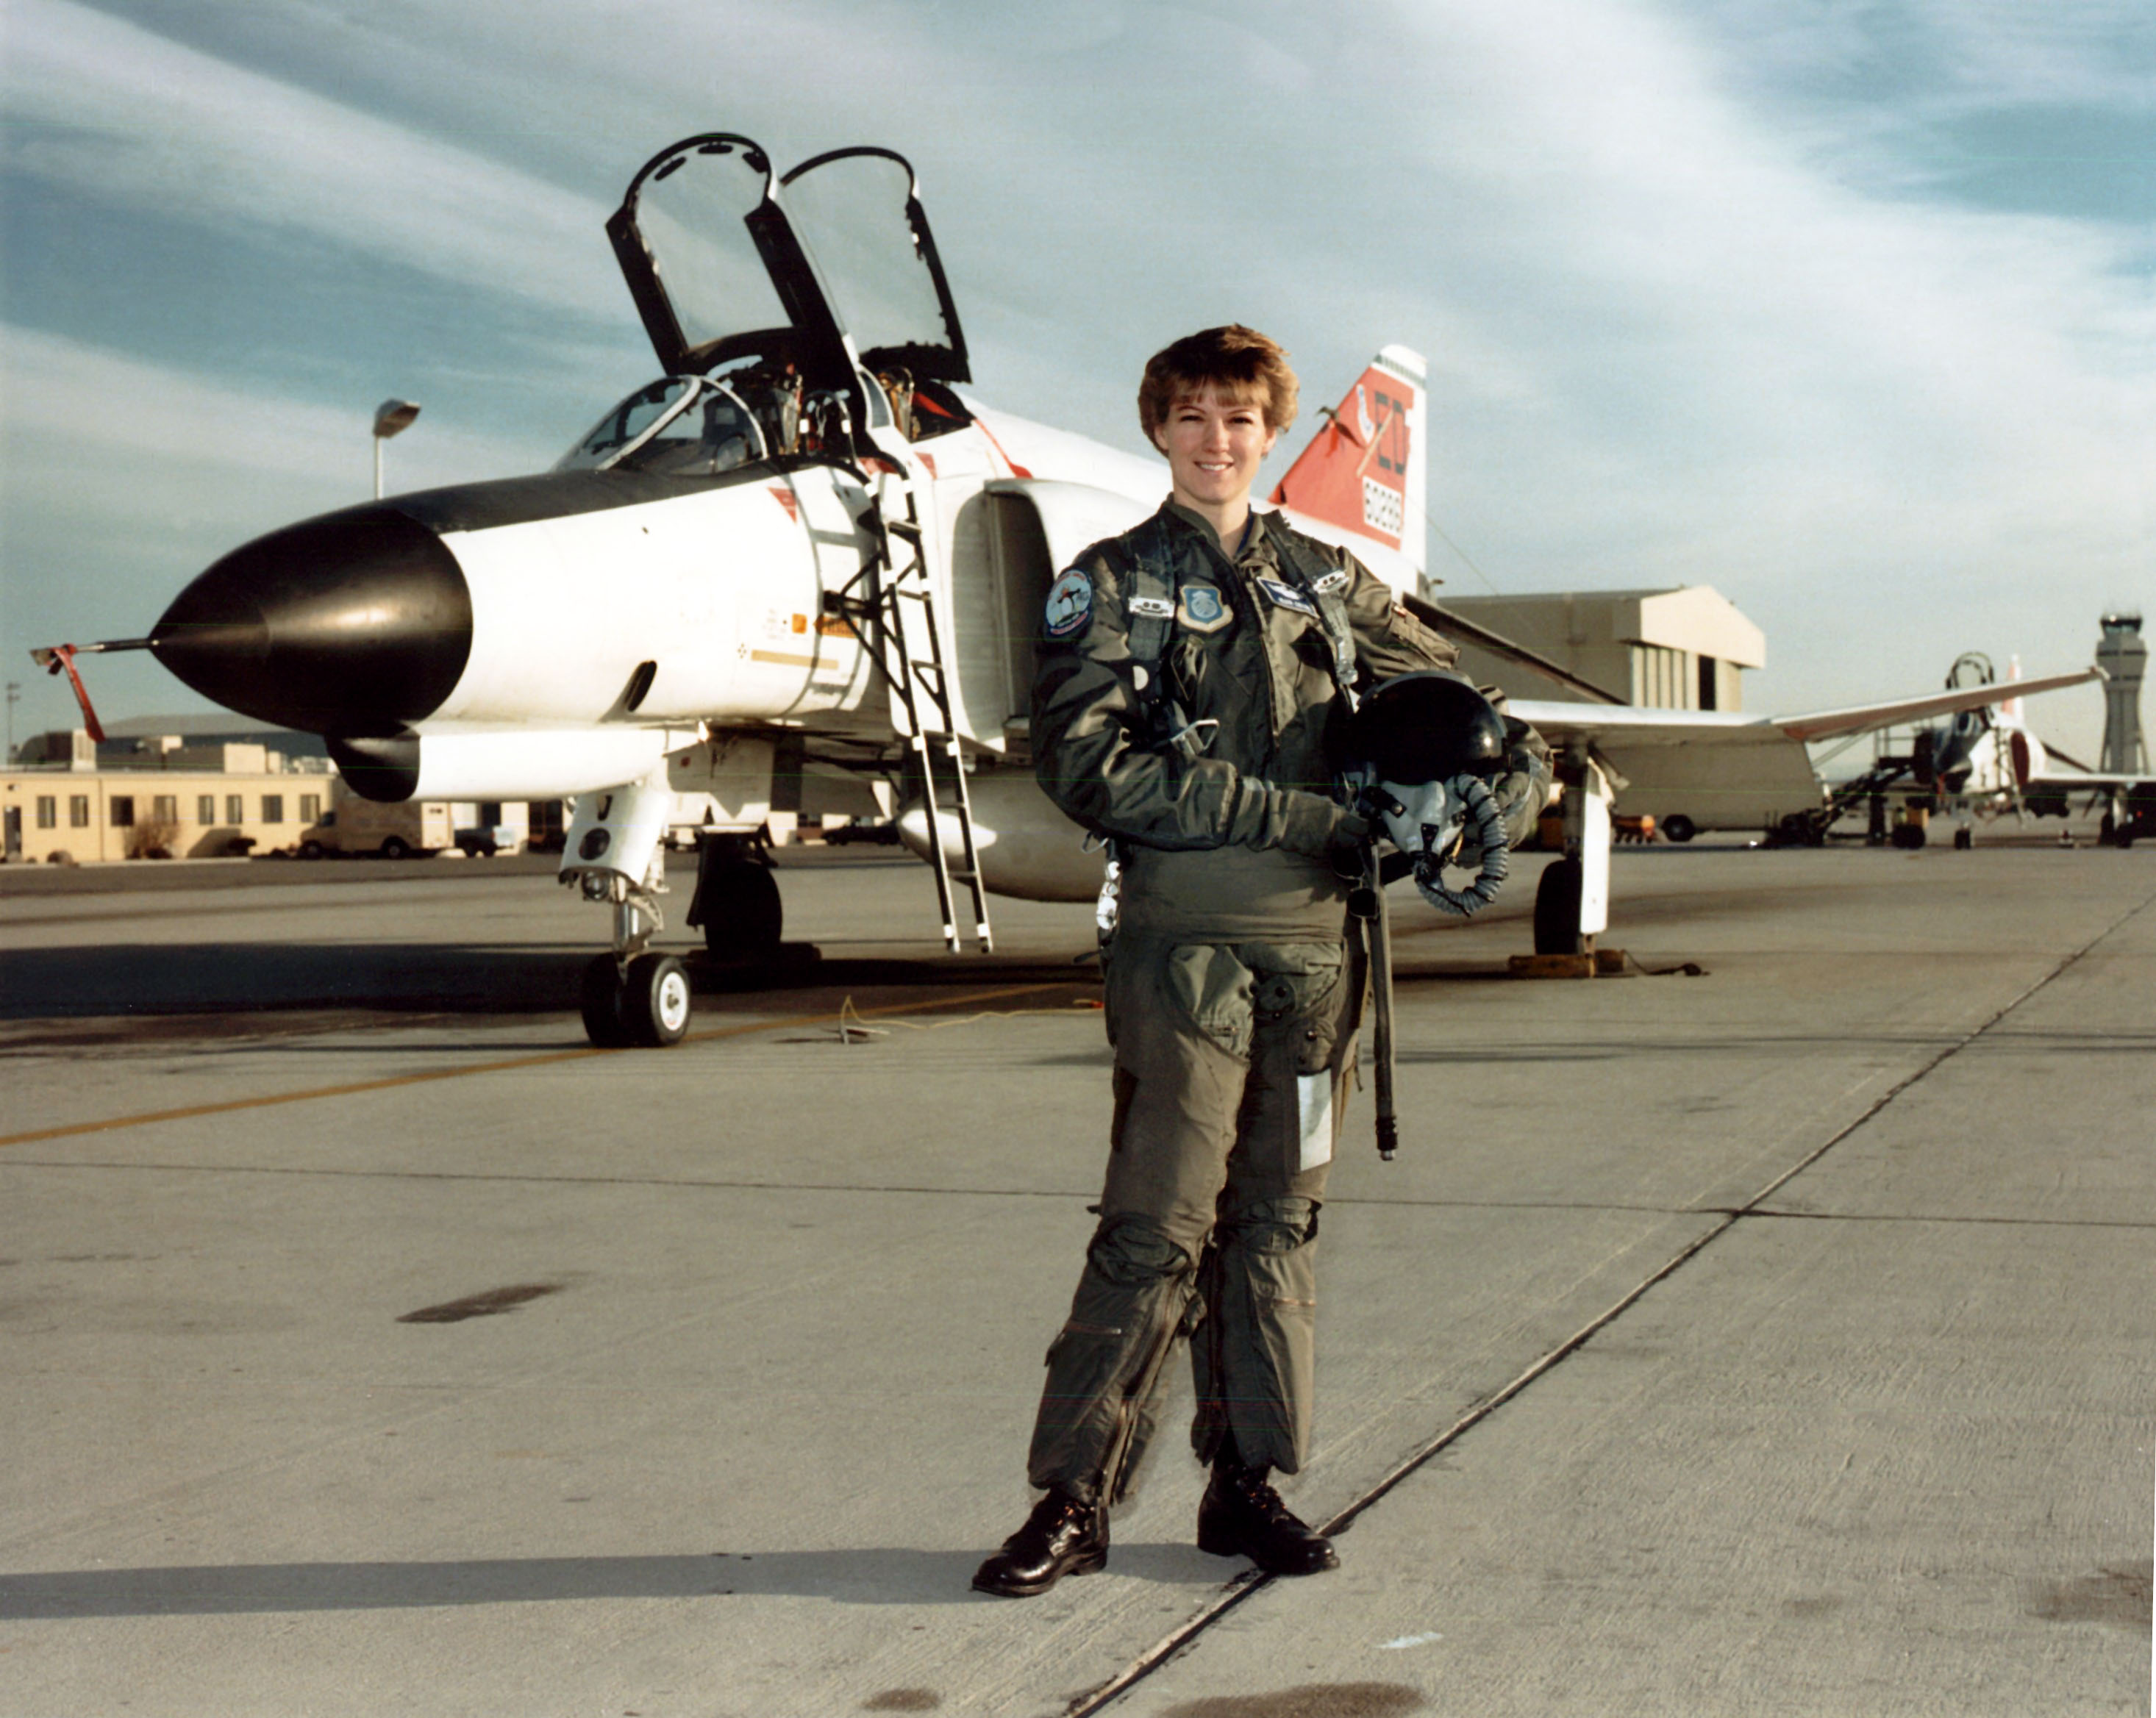 Major Eileen M. Collins with F-4E-31-MC Phantom II, 66-0289, at the Air Force Test Pilot School, Edwards Air Force Base, California, 1990. A pilot instructor on the T-38 Talon and C-141 Starlifter, Eileen Collins graduated from Class 89B at Edwards. Accepted as an astronaut for NASA, she piloted the space shuttle Discovery on mission STS-63, Atlantis, STS 84, and commanded Columbia STS-93 and Discovery, STS-114.(U.S. Air Force)